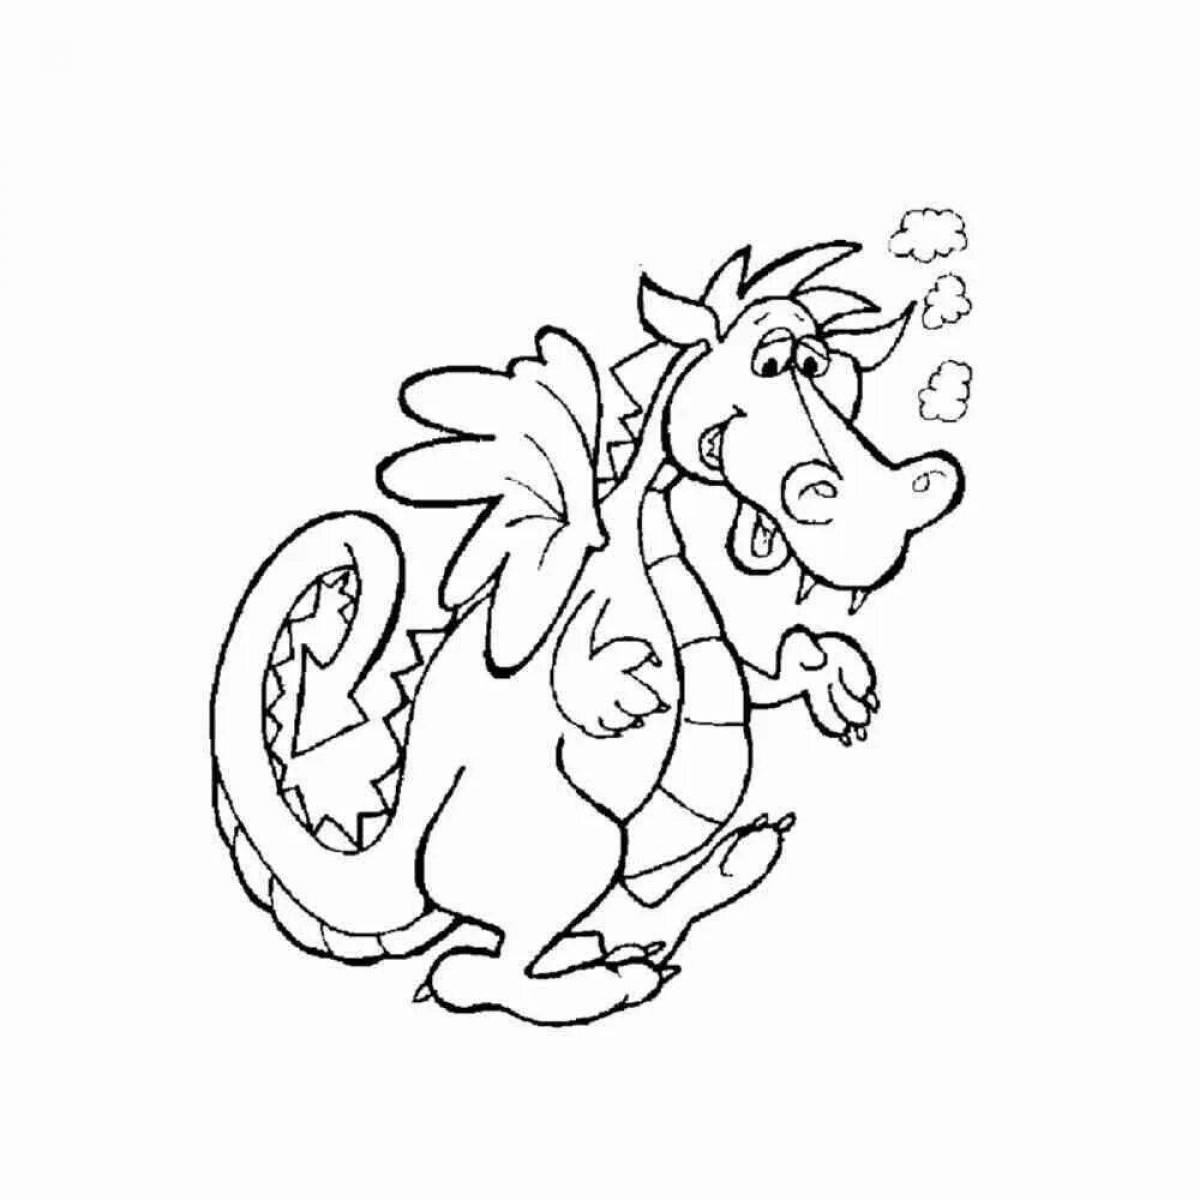 Incredible dragon coloring pages for 4-5 year olds